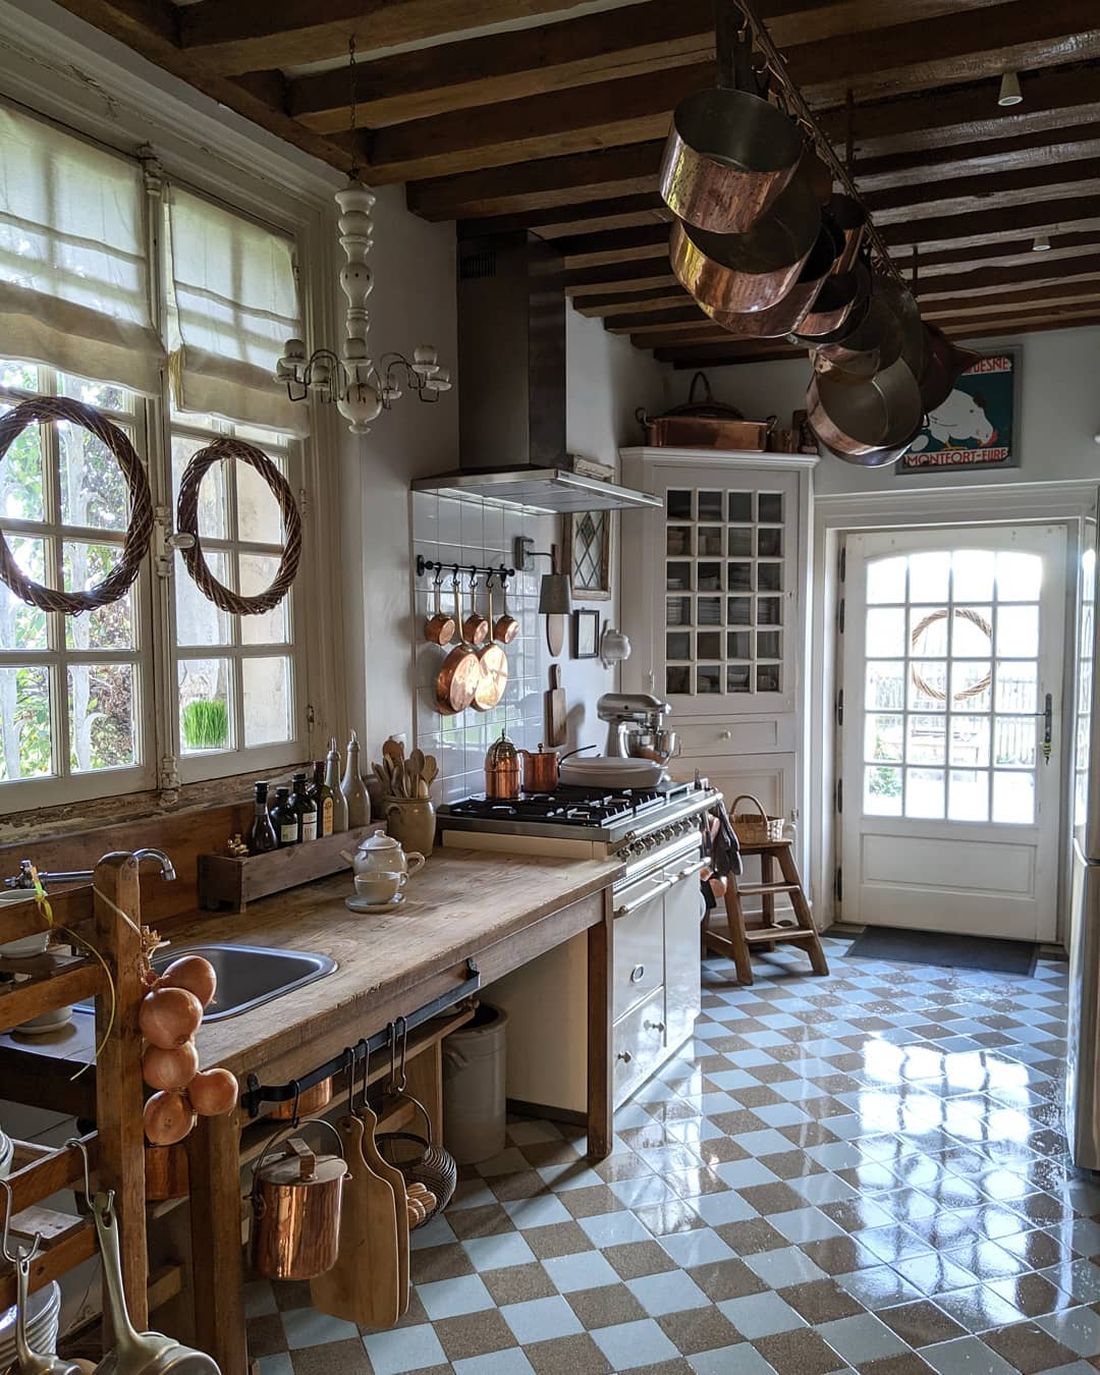 French Country Kitchen with Checkered Floor Tile via @cat_in_france